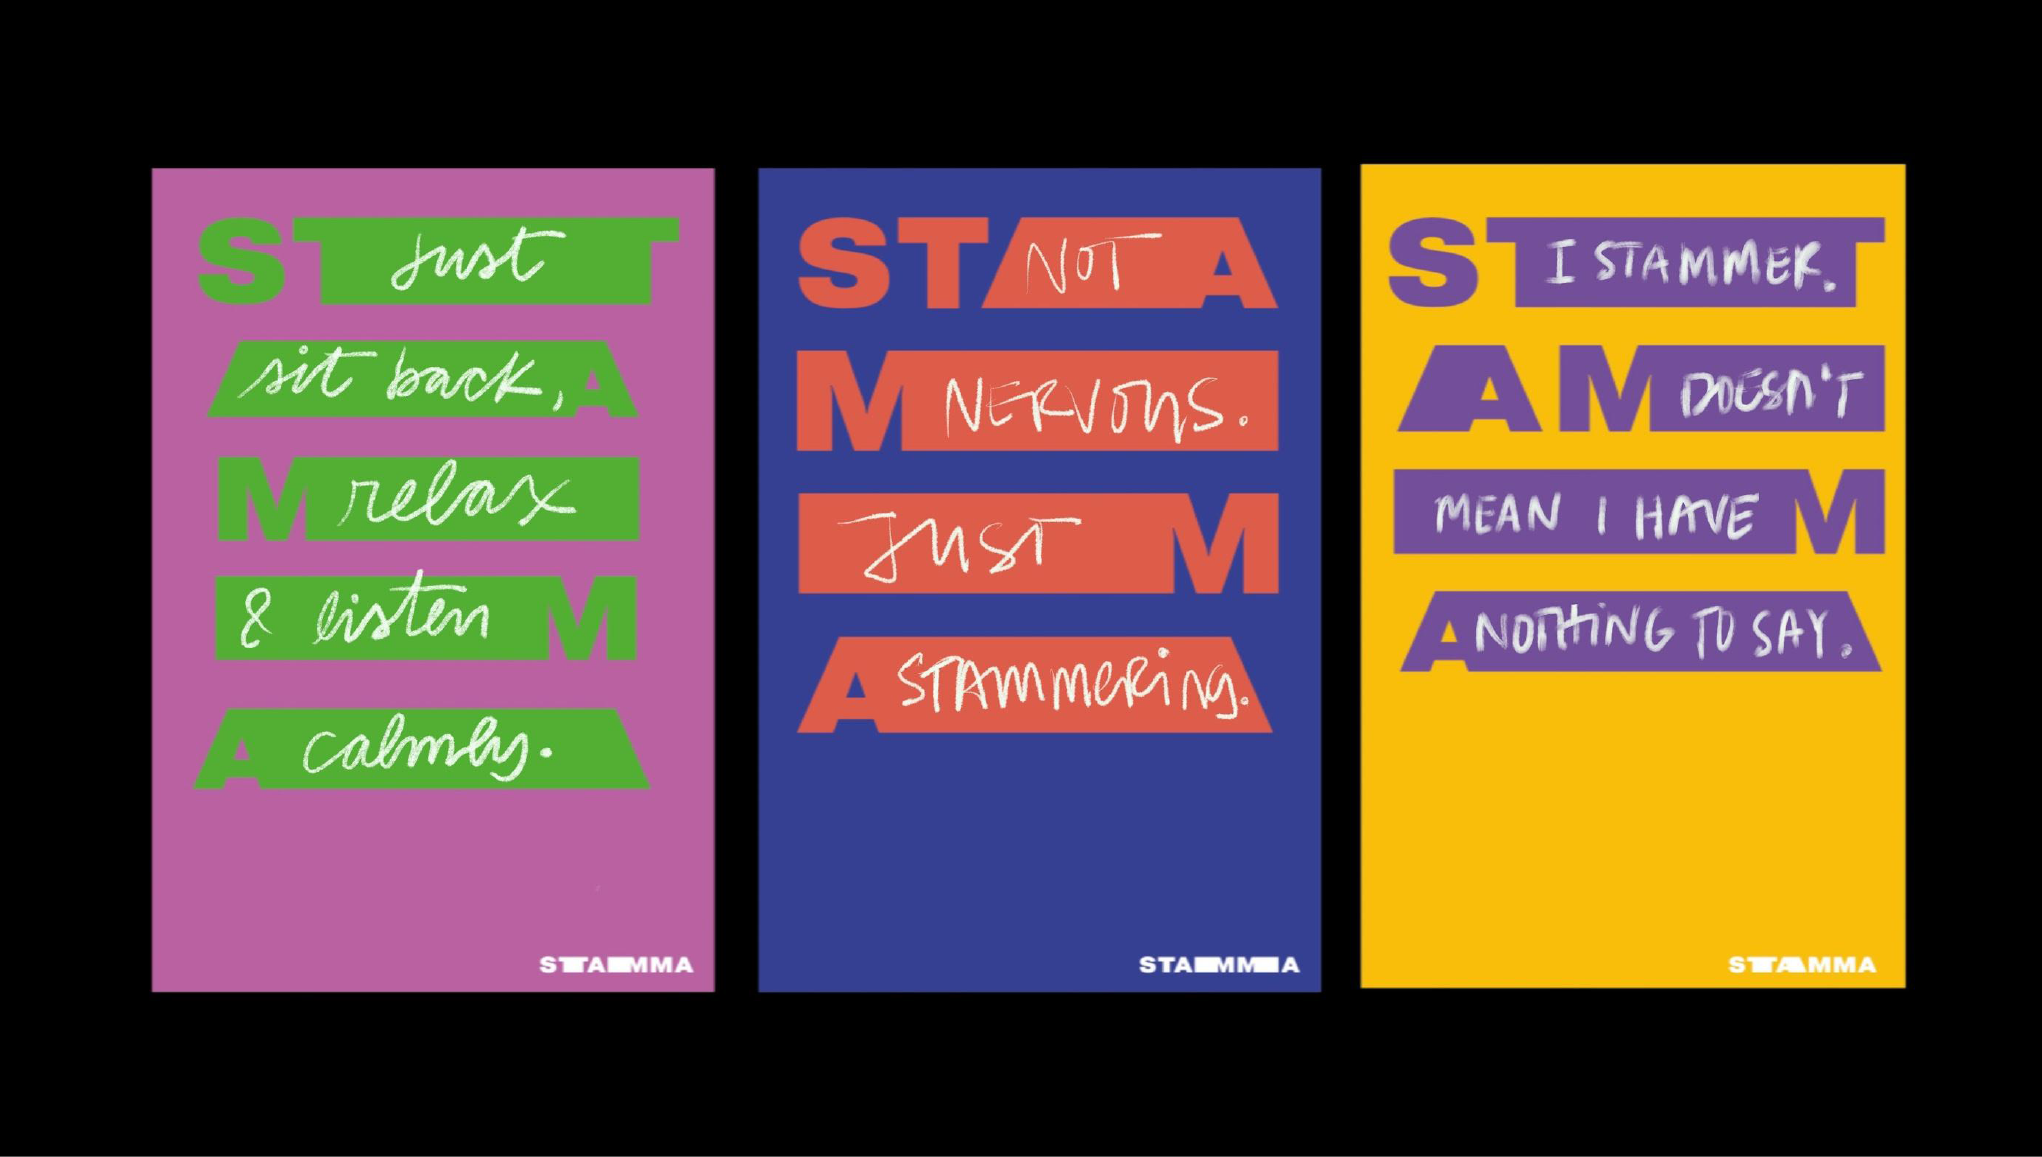 Three posters showing the STAMMA re-branding campaign